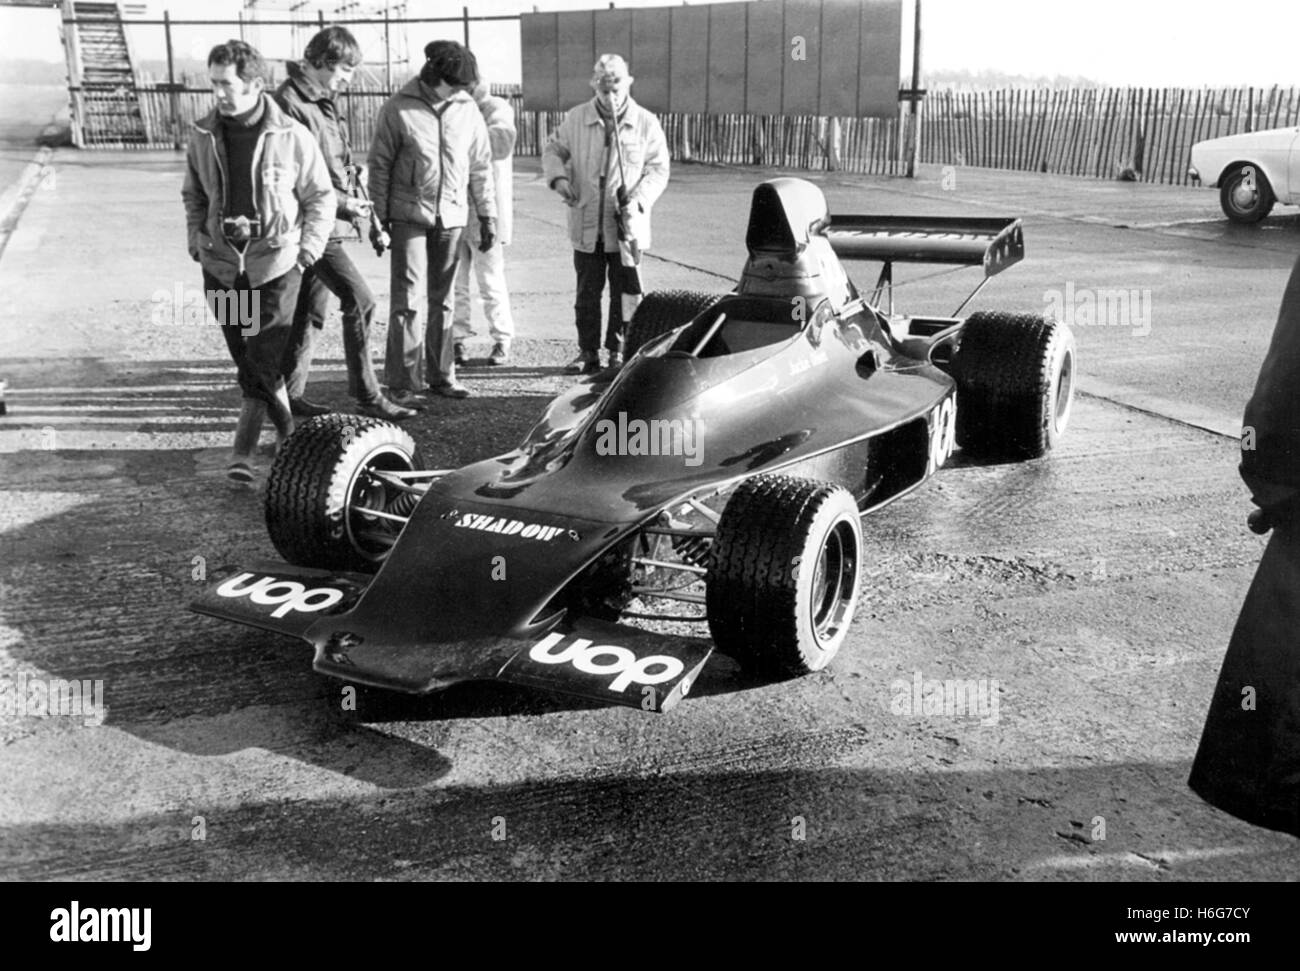 UOP SHADOW LAUNCH SILVERSTONE SOUTHGATE IN CAP 1973 Stock Photo